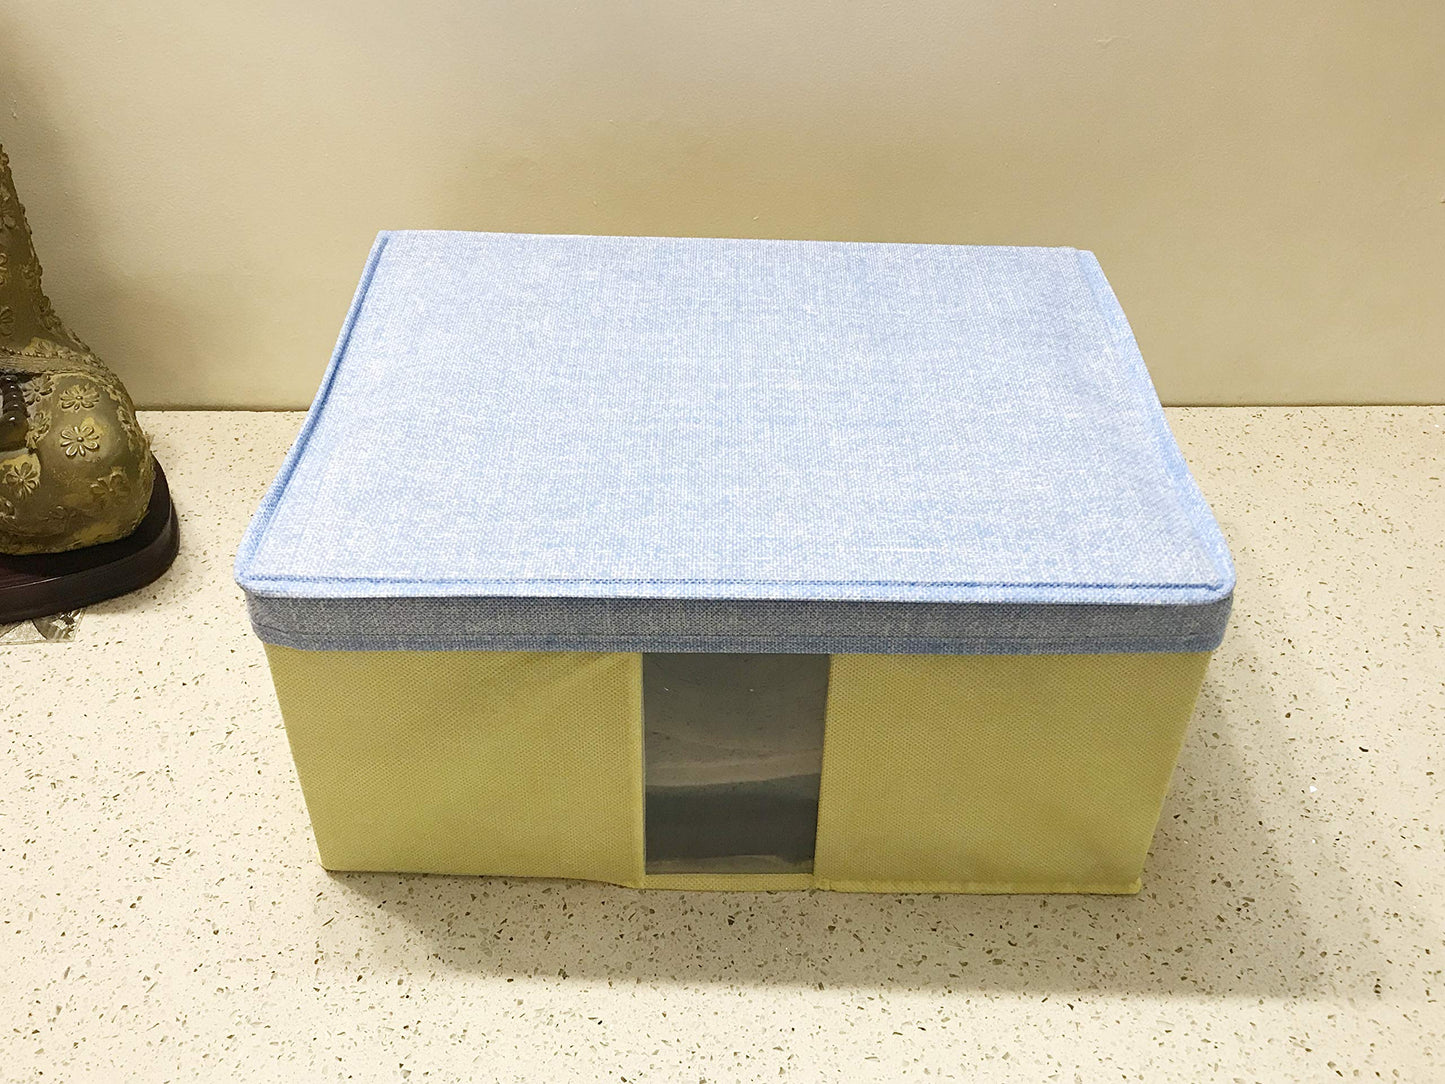 Foldable Fabric Storage Box Organizer with See-Through Window - Multicolor